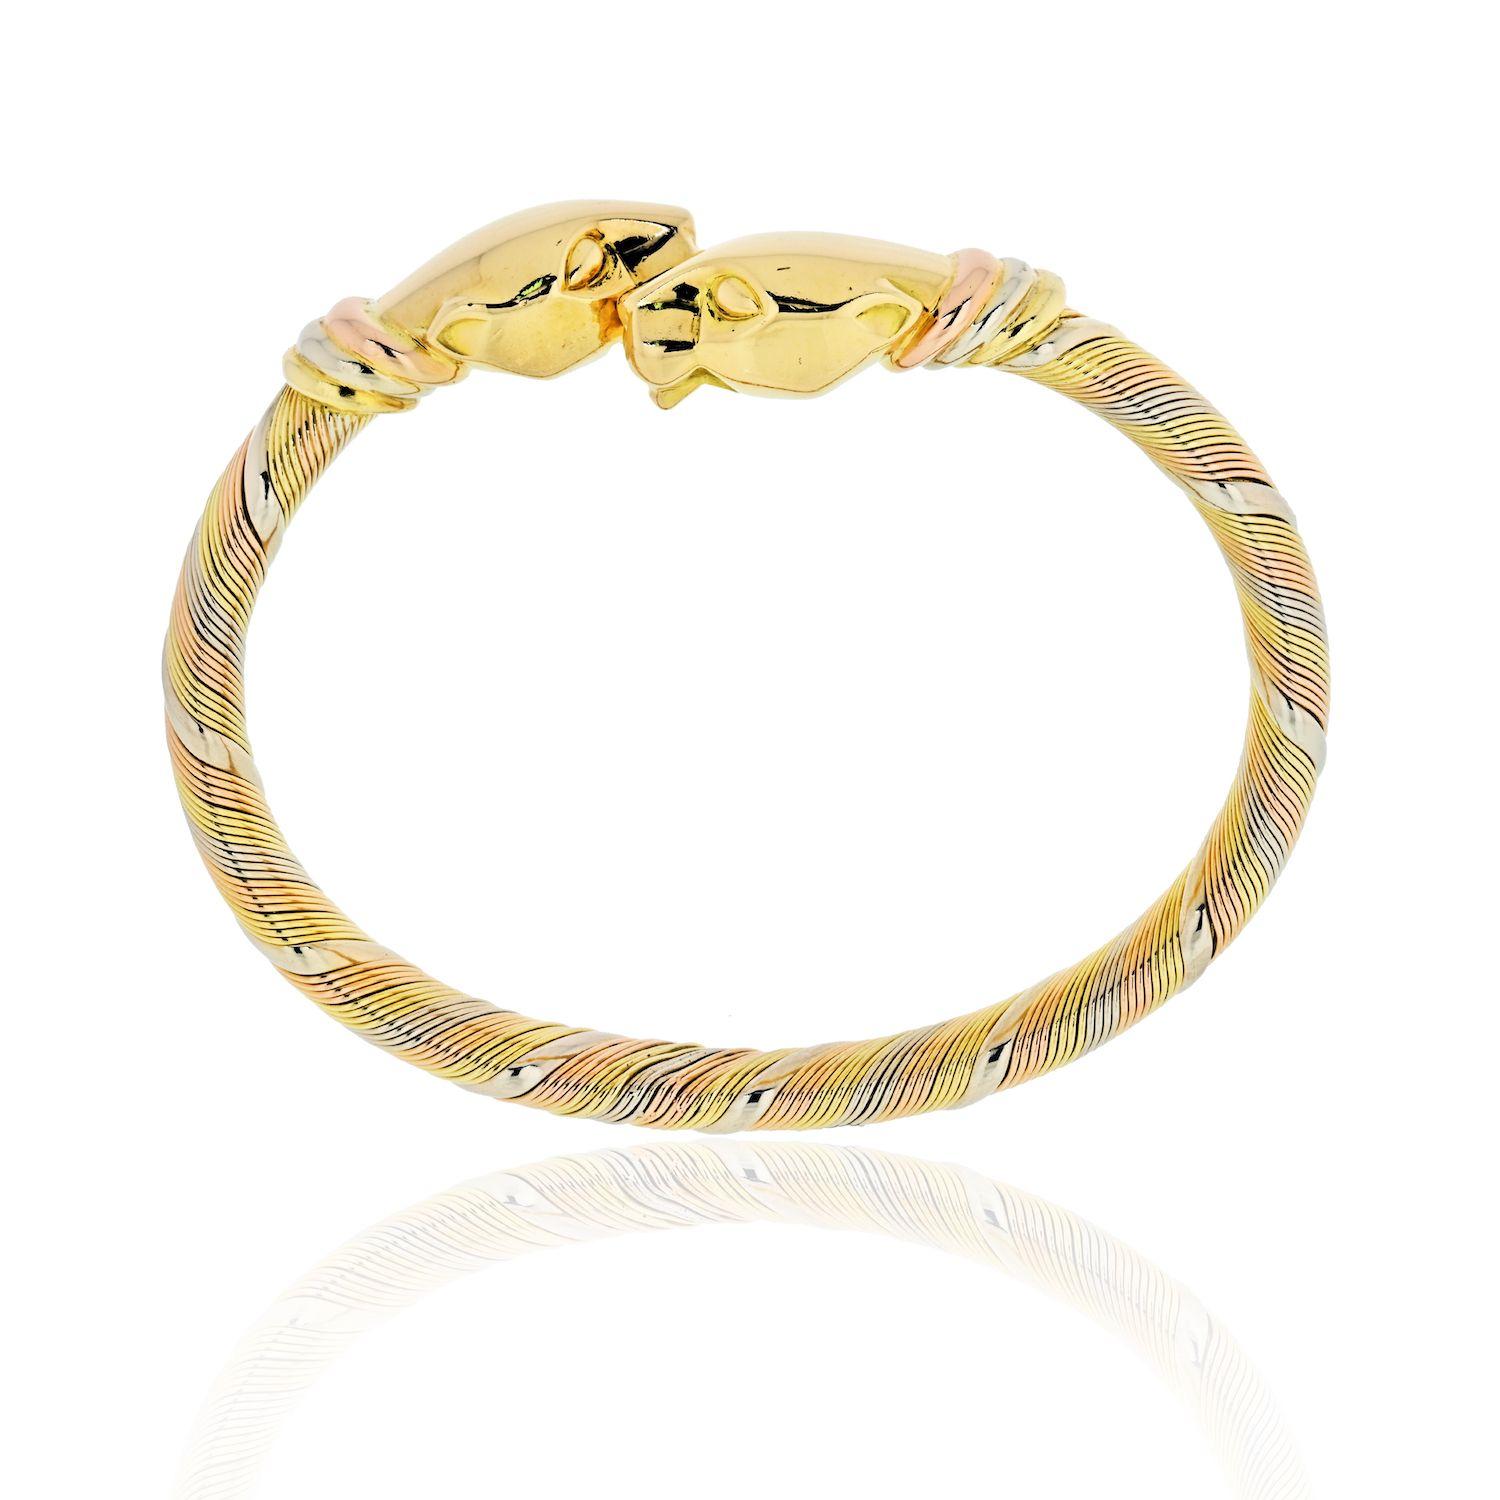 Cartier solid 18k rose, white and yellow gold bracelet with a fine polished finish. This elite piece features a double panther head set in a bypass design. The bracelet is 13mm wide with strips of fine wire fit together in the three gold colors. It